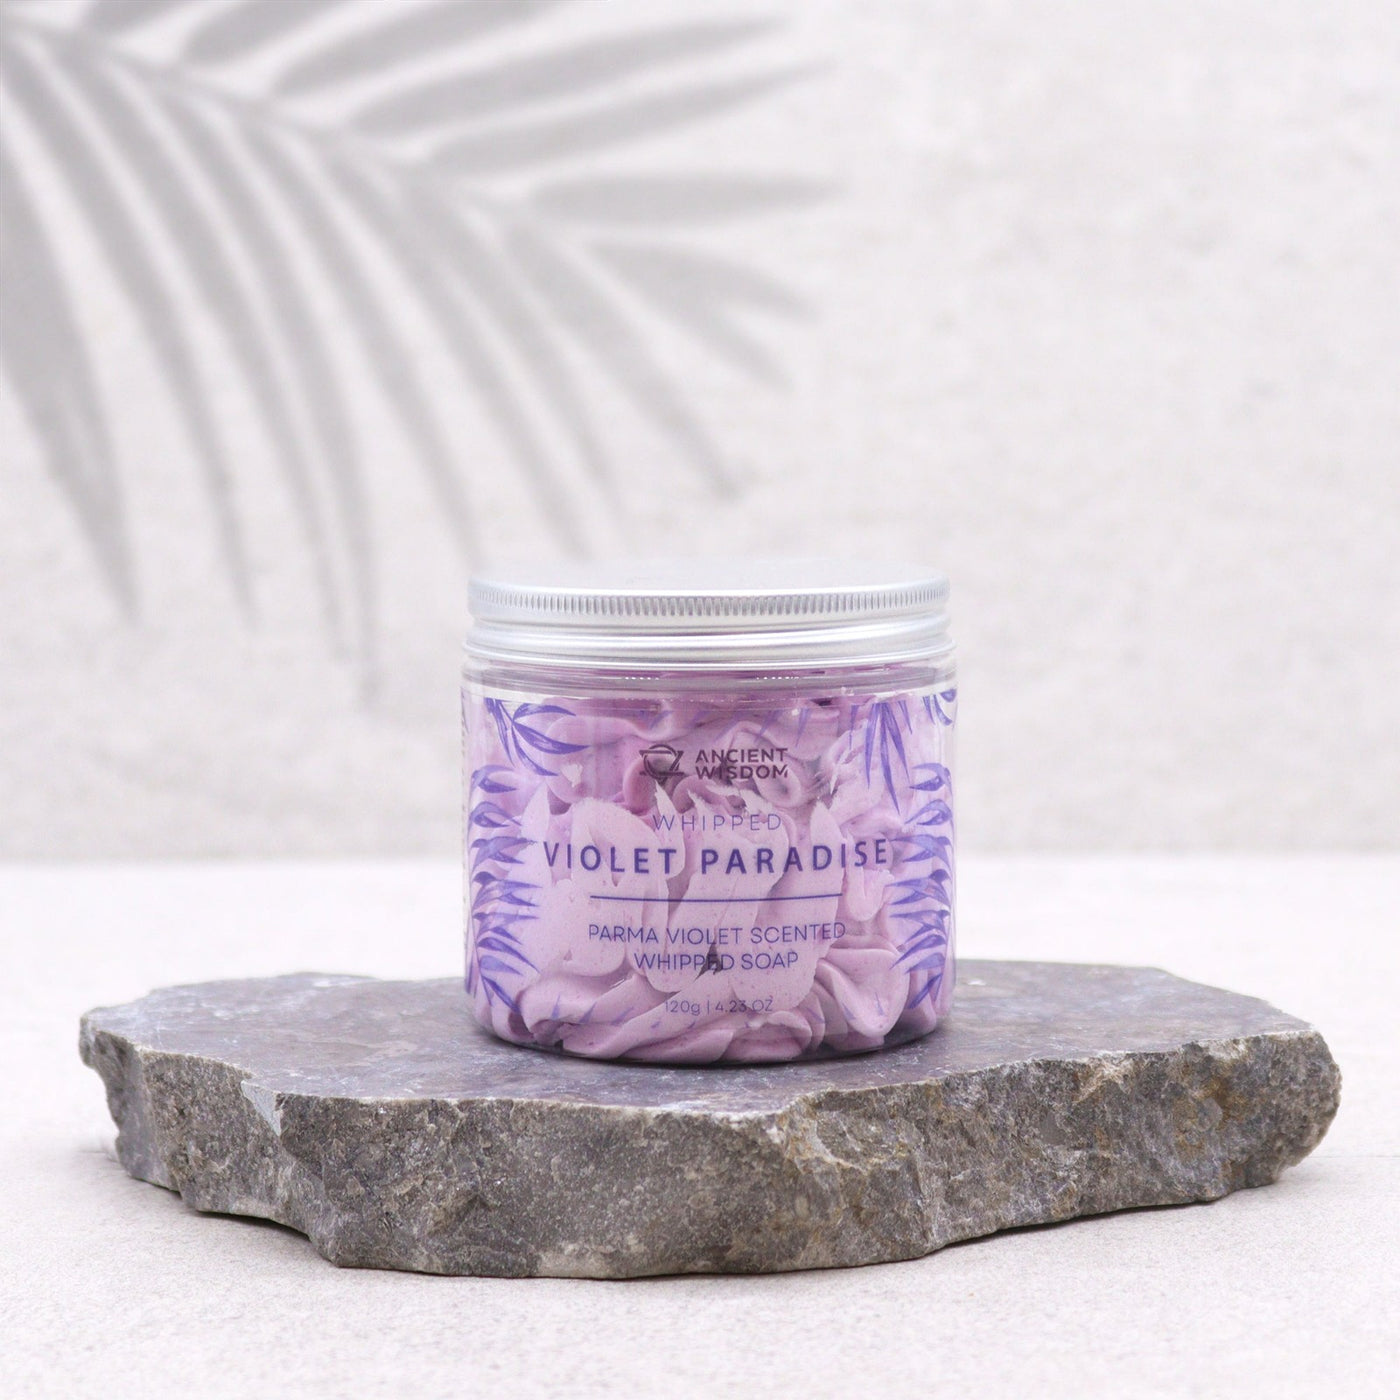 Violet Paradise Parma Violet Paraben Free Whipped Soap In The Jar From Ancient Wisdom.